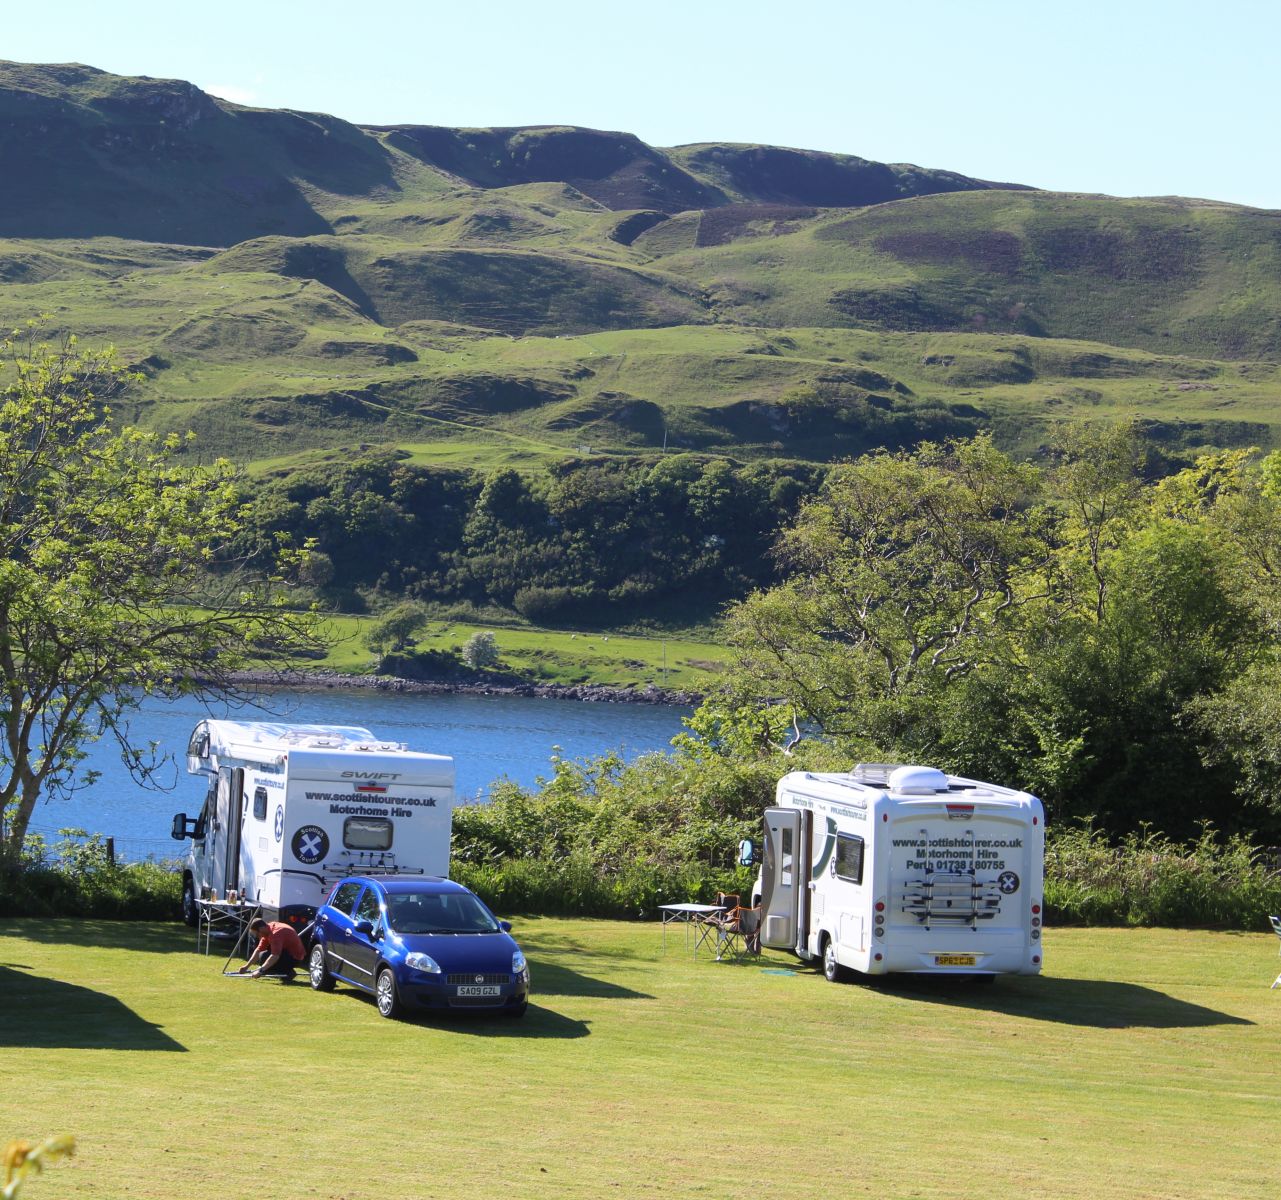 Motorhomes parked overlooking the loch